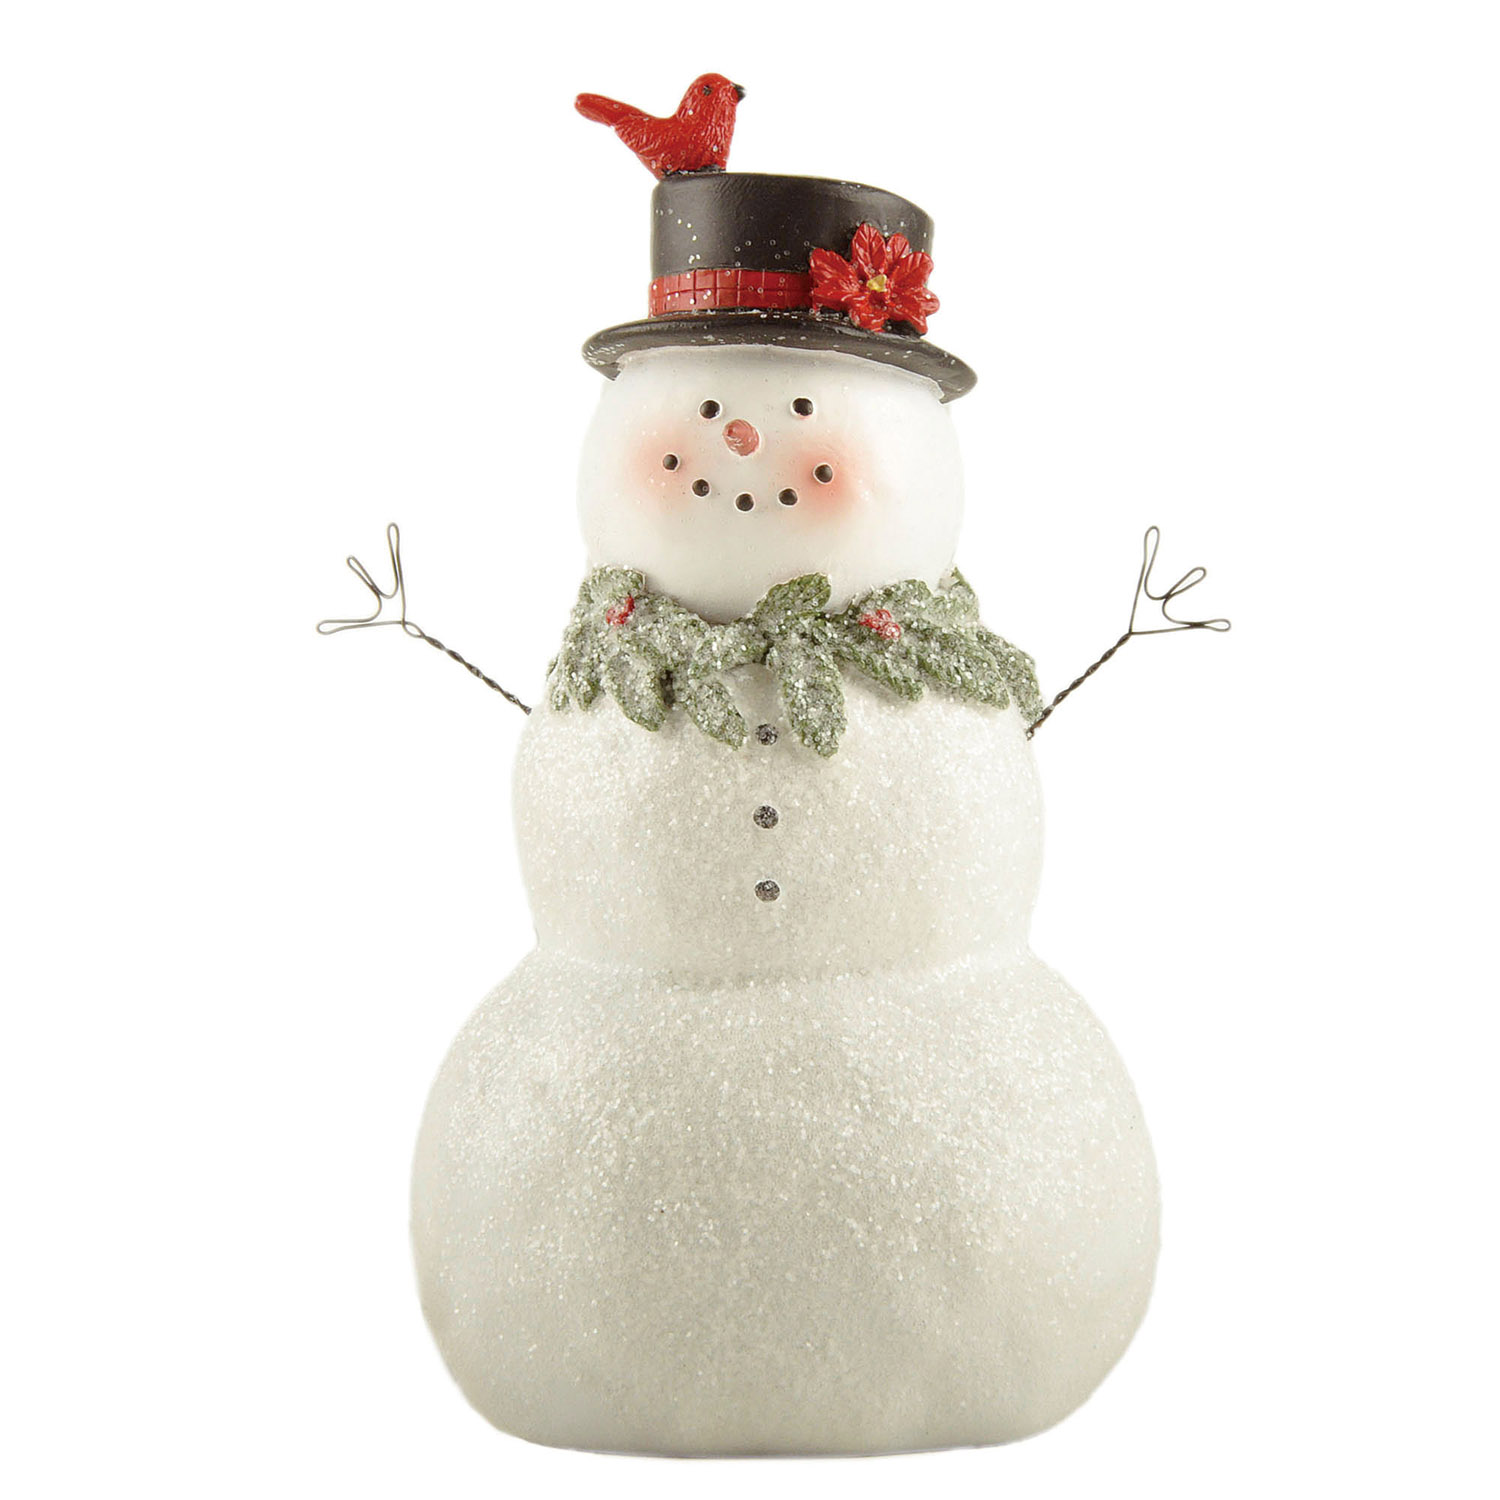 Elegant Resin Snowman Figurine with Top Hat and Red Bird – Sparkling Christmas Decoration for Festive Home Decor 238-13811